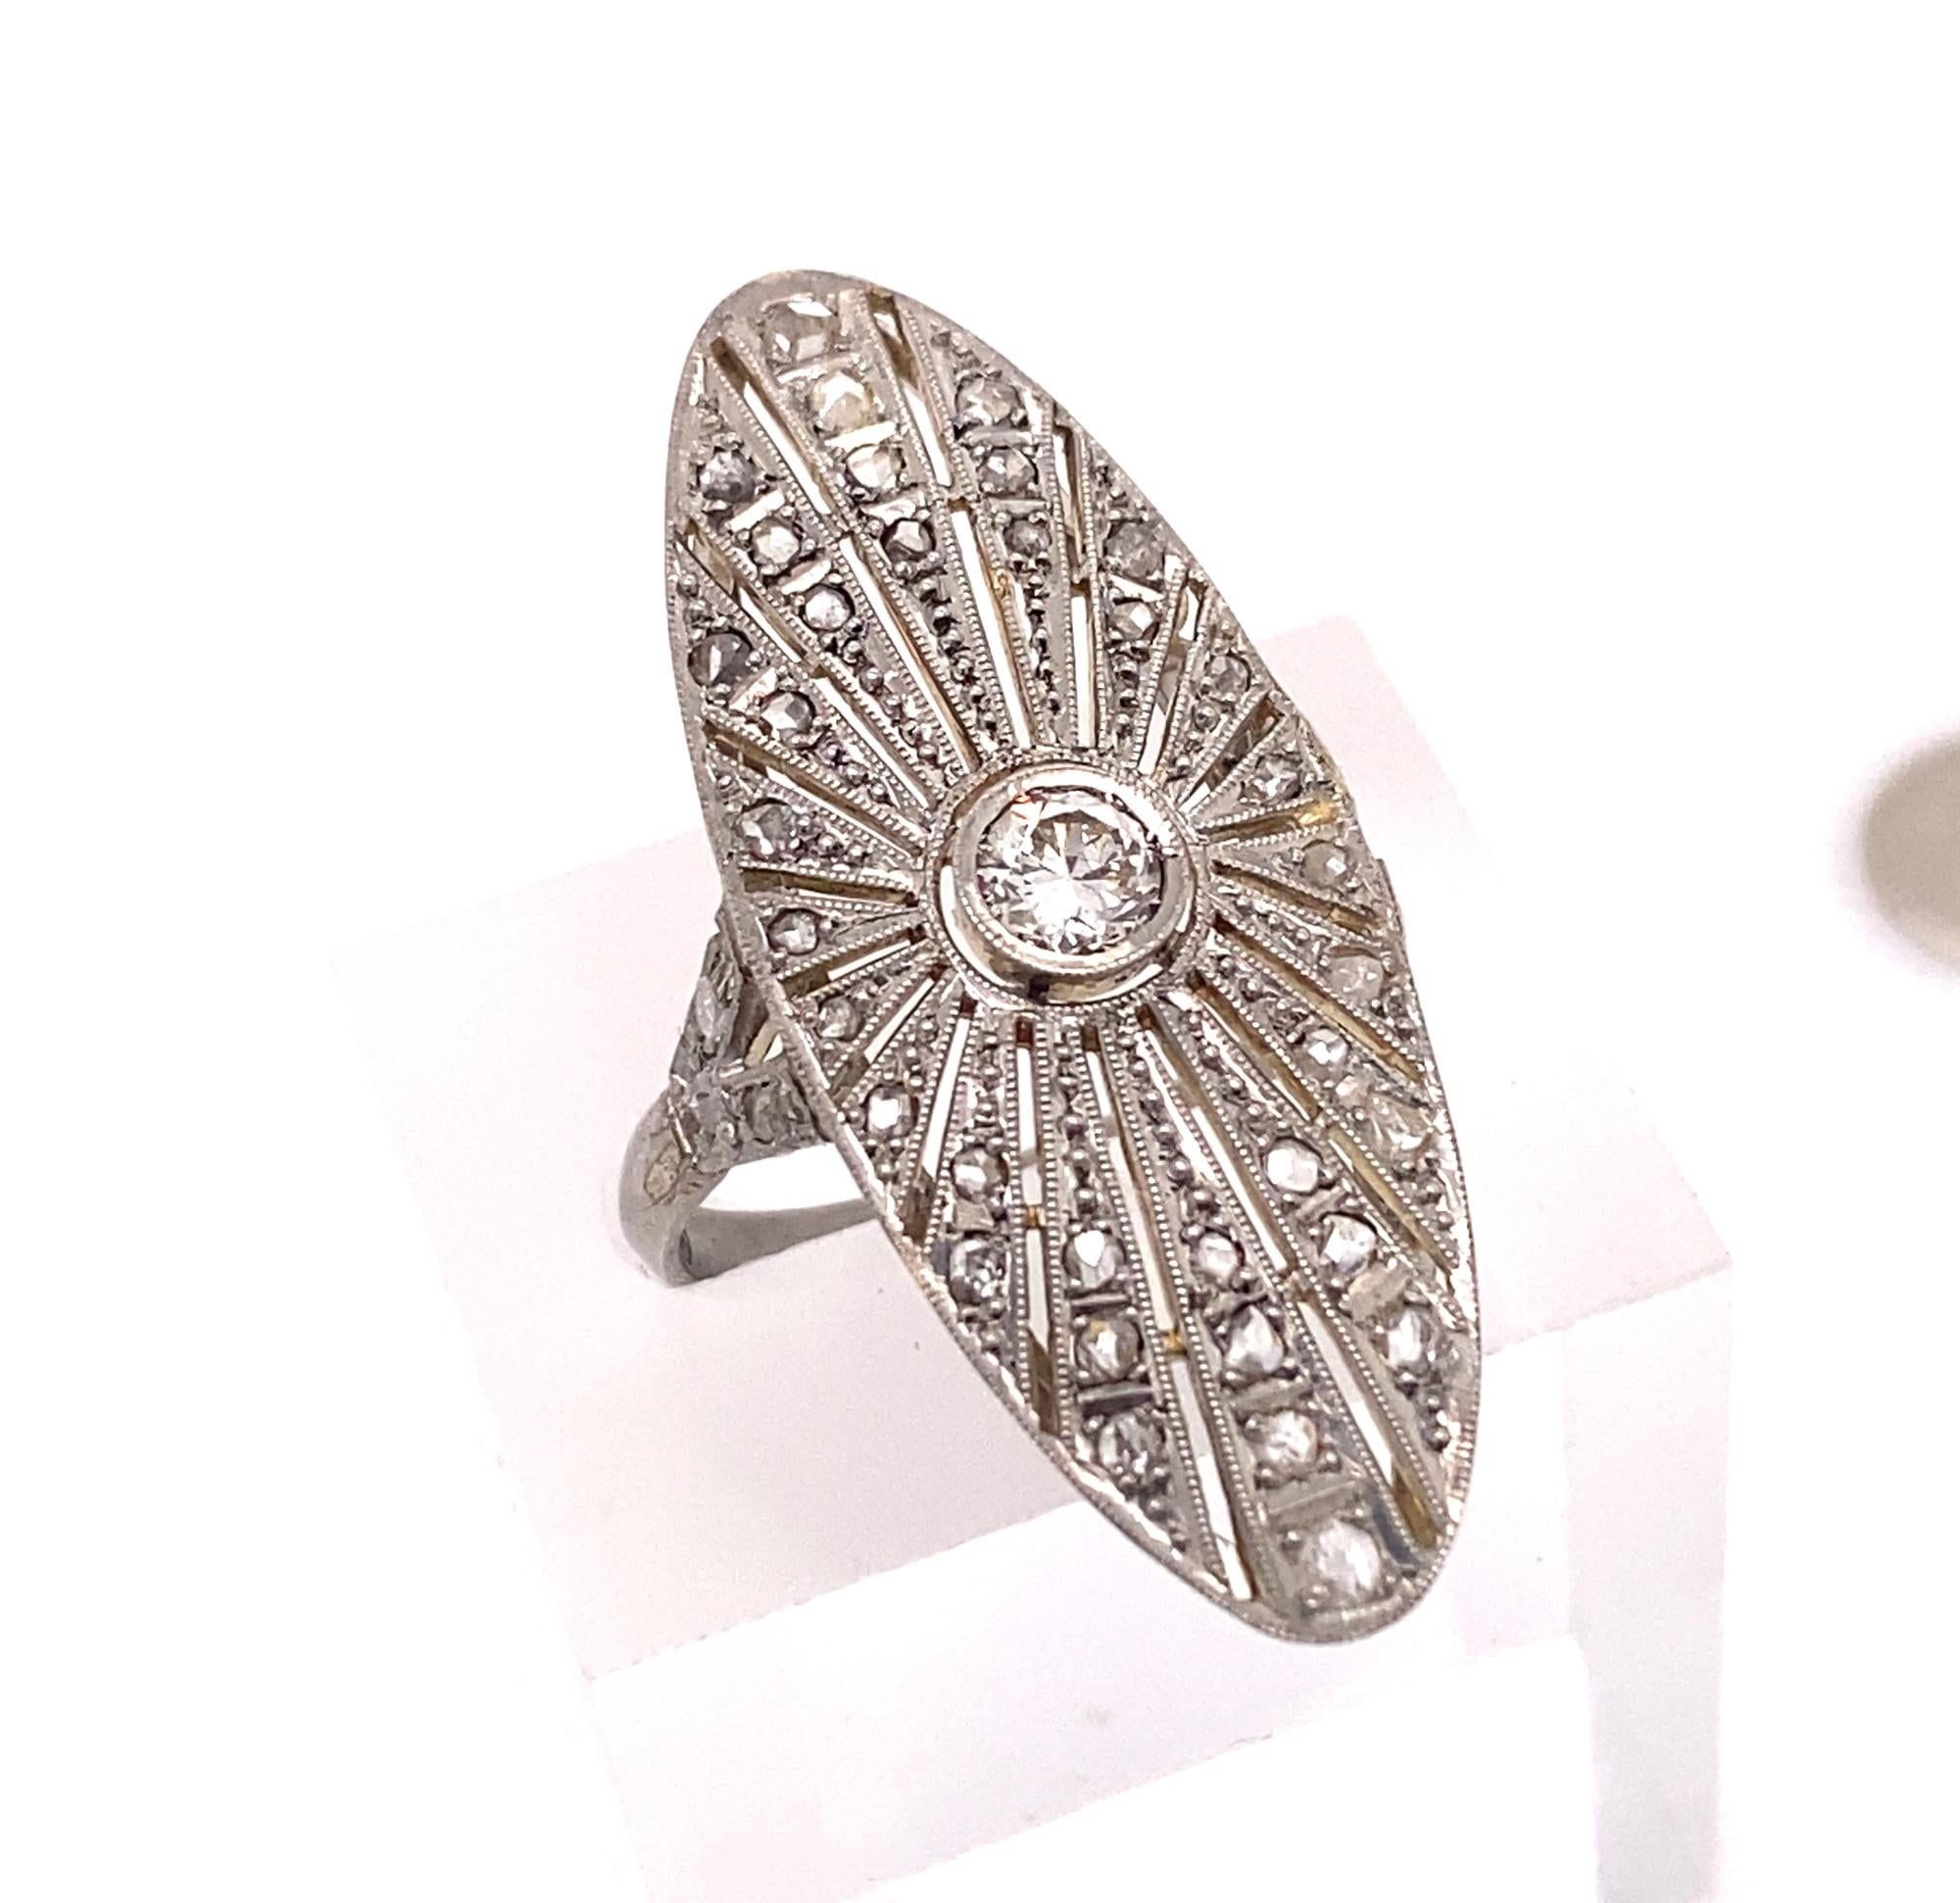 This is a beautiful original art deco filigree ring set with a .30 cart transitional cut with 42 rose cut diamonds. The setting is marked 950 for platinum has detailed filigree on the gallery. The center diamond is I color VS-2 clarity total diamond